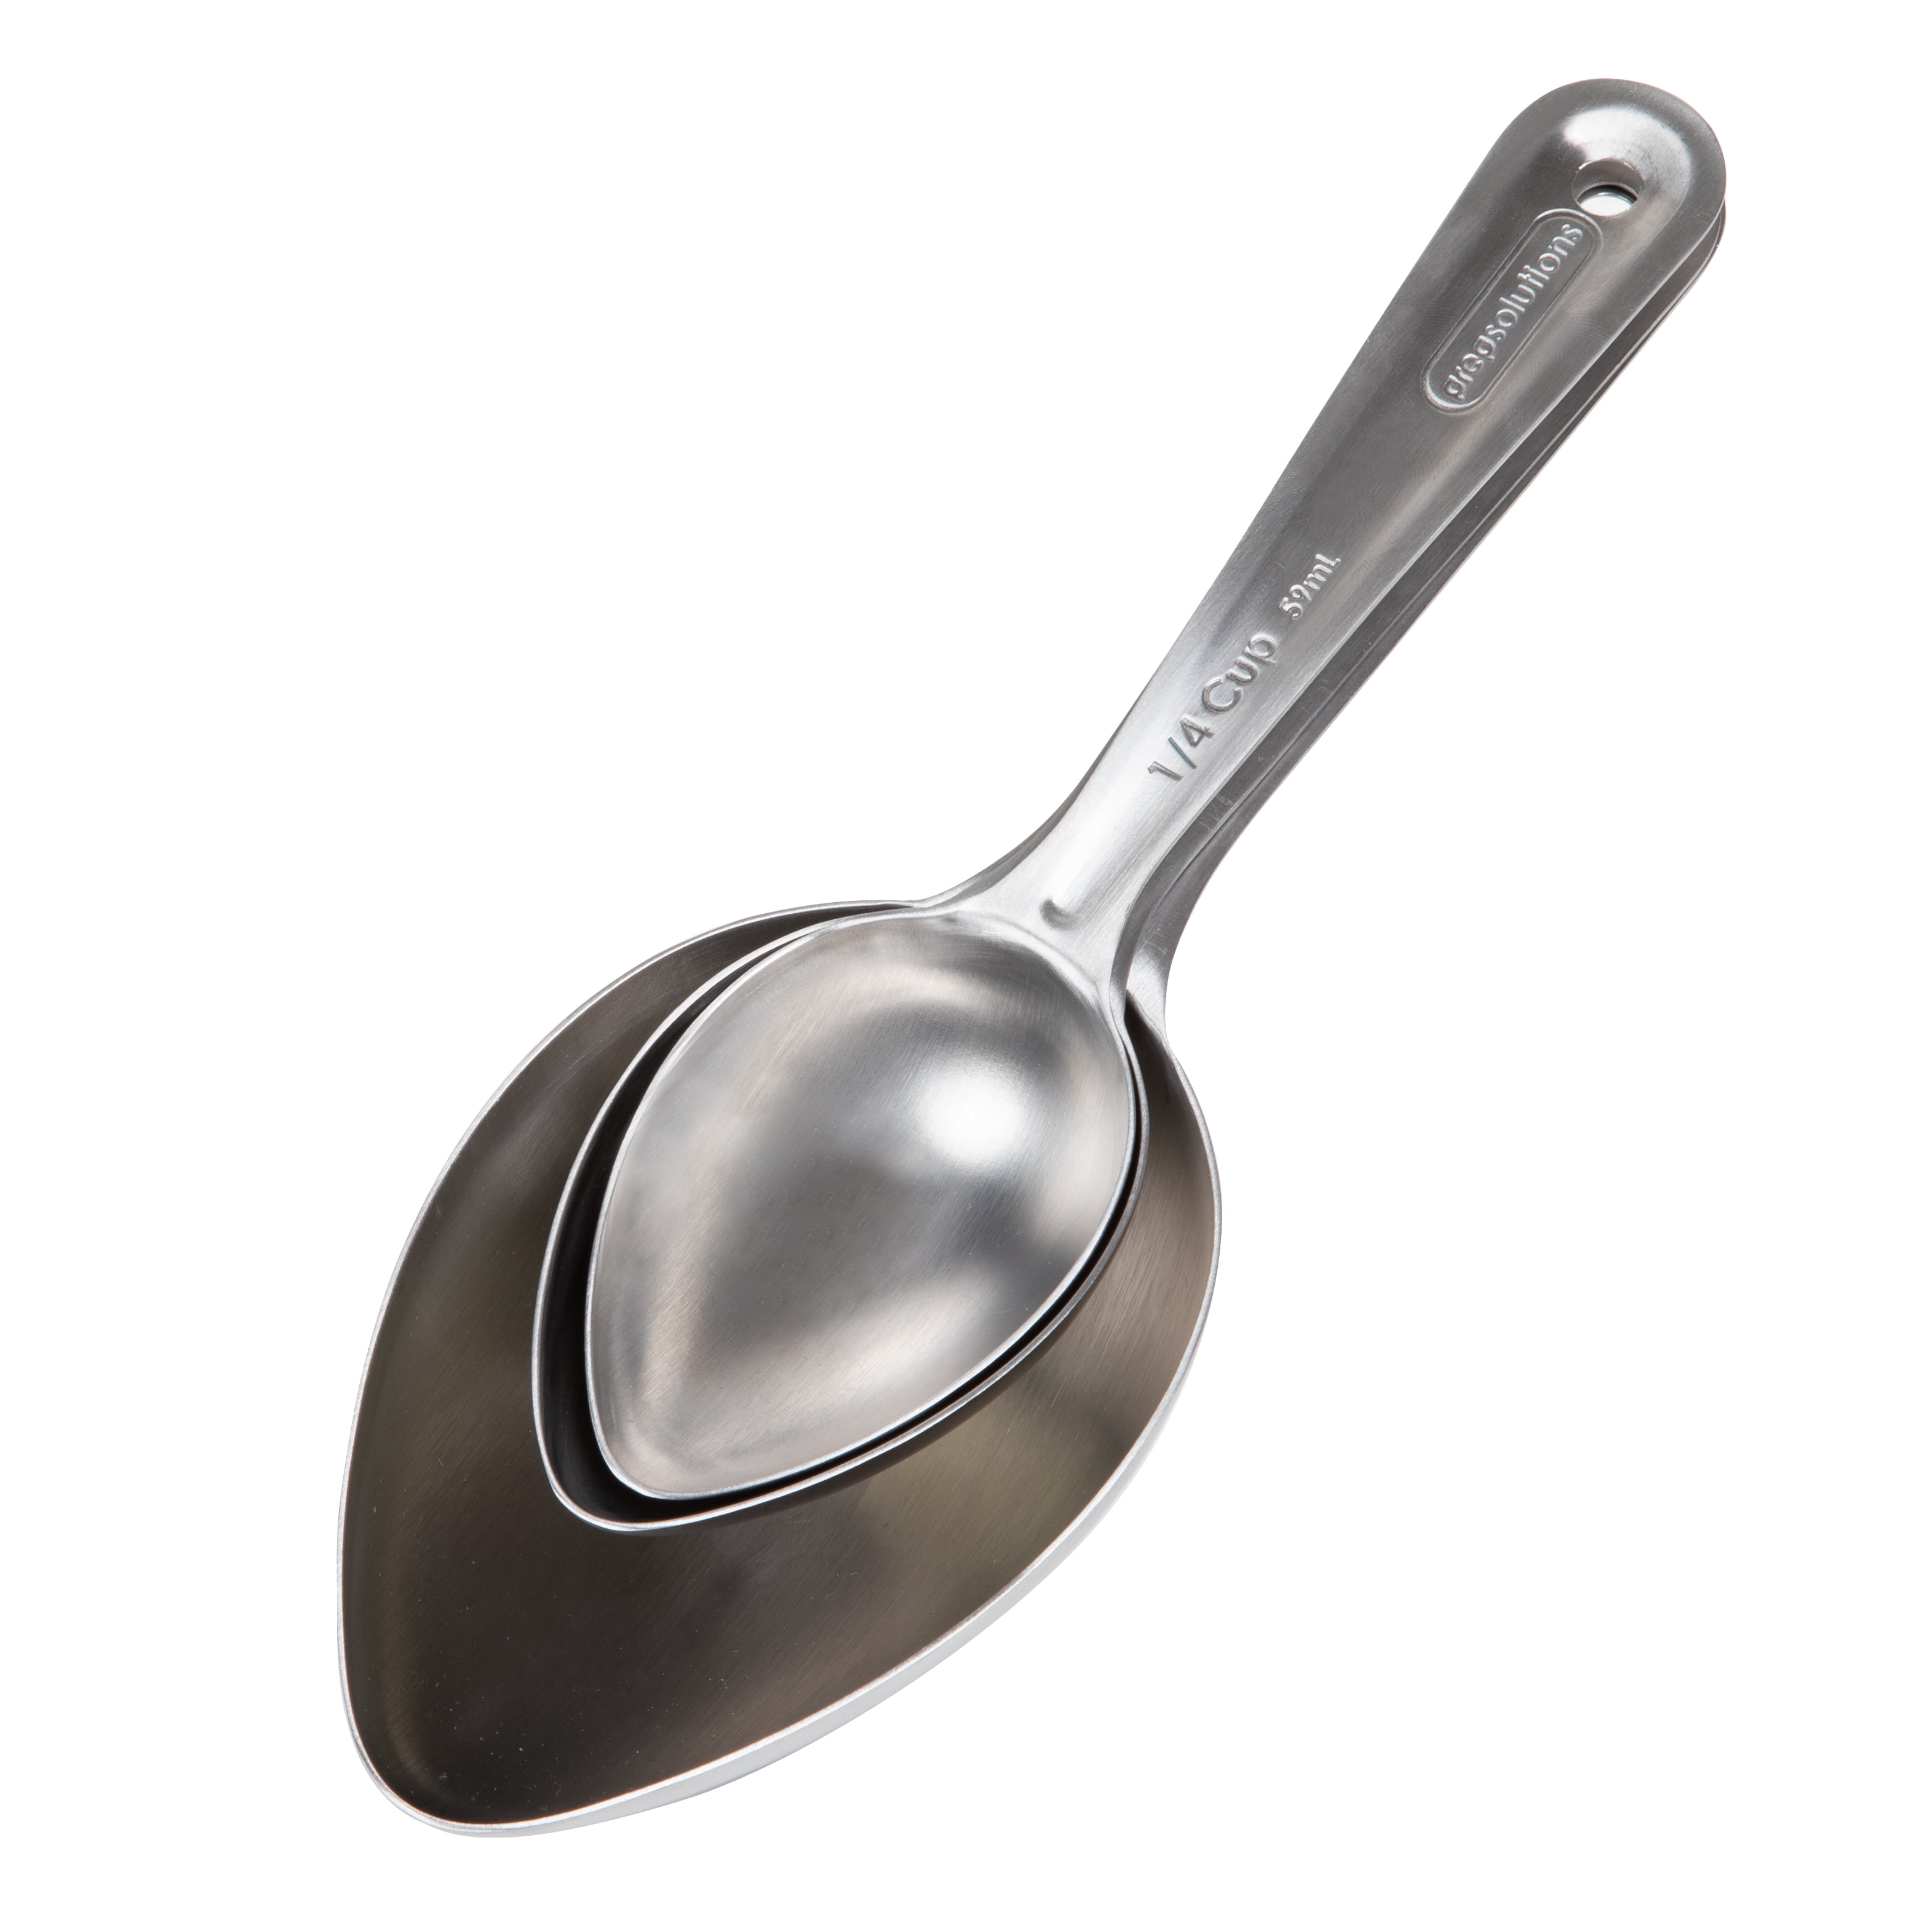 diollo Stainless Steel Measuring Cup, Oval Shaped - Matt Finish, Set of 3  (1/2, 1/4 & 1/8 Cup) 